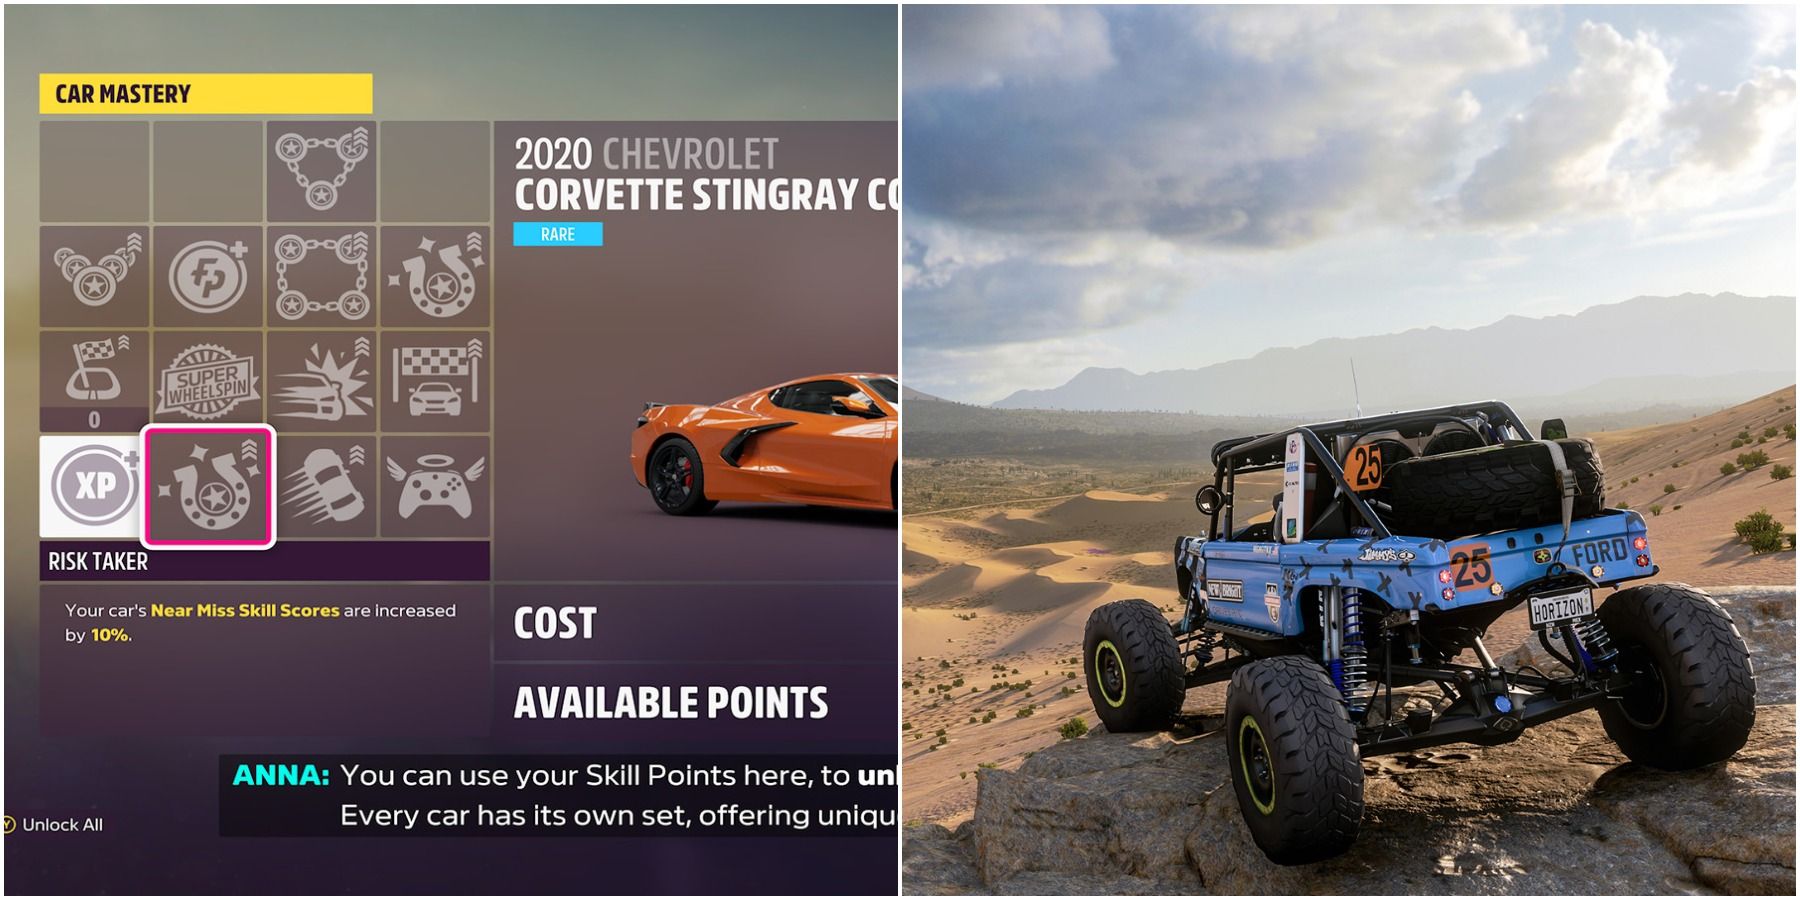 (Left) Car Mastery (Right) Vehicle in the desert